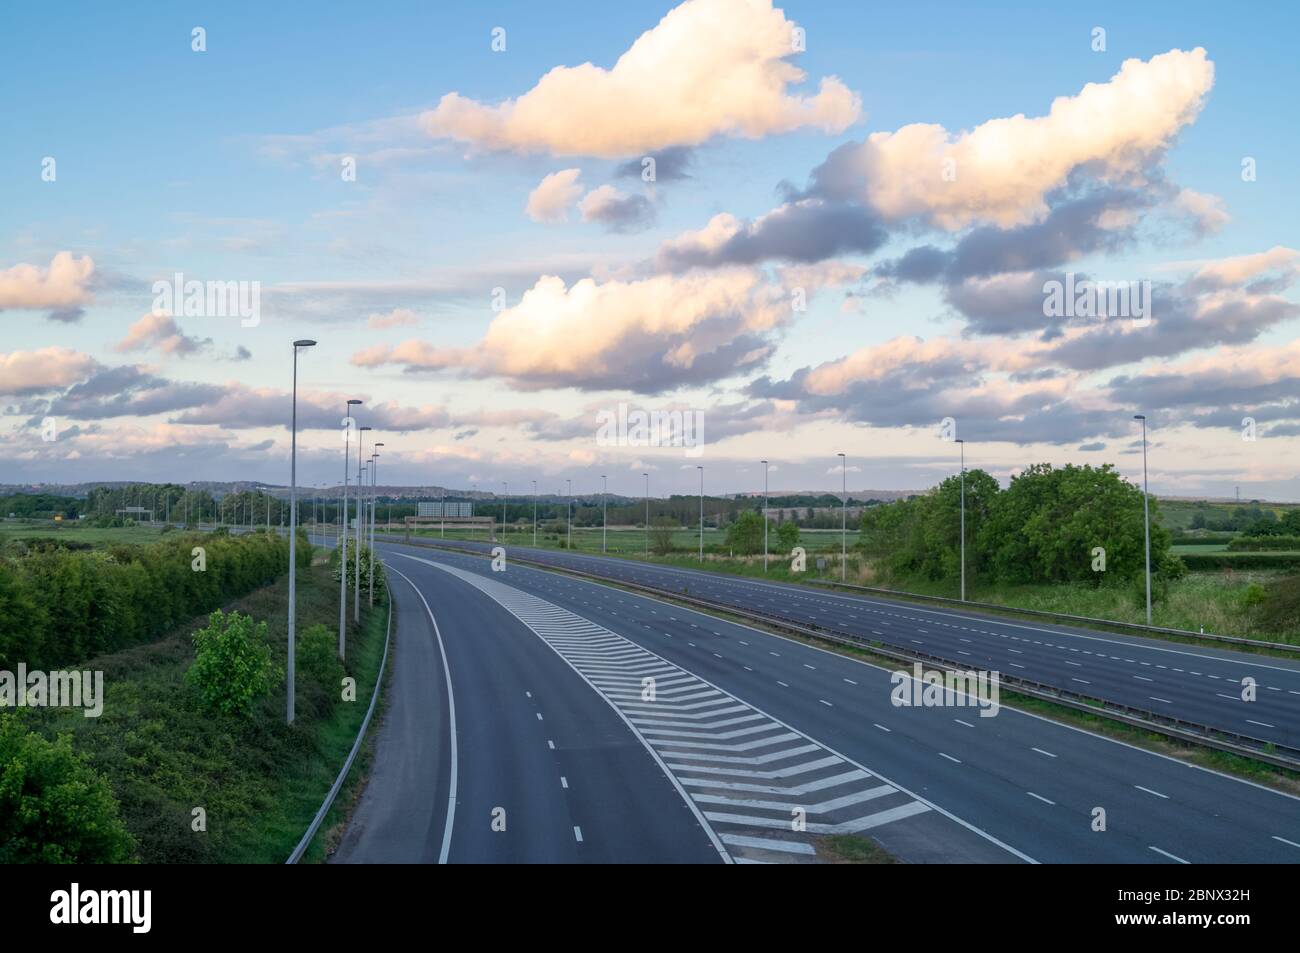 M56 motorway empty no cars devoid of traffic no travel lockdown essential travel only. The road is empty during the coronavirus lockdown May 2020, UK. Stock Photo